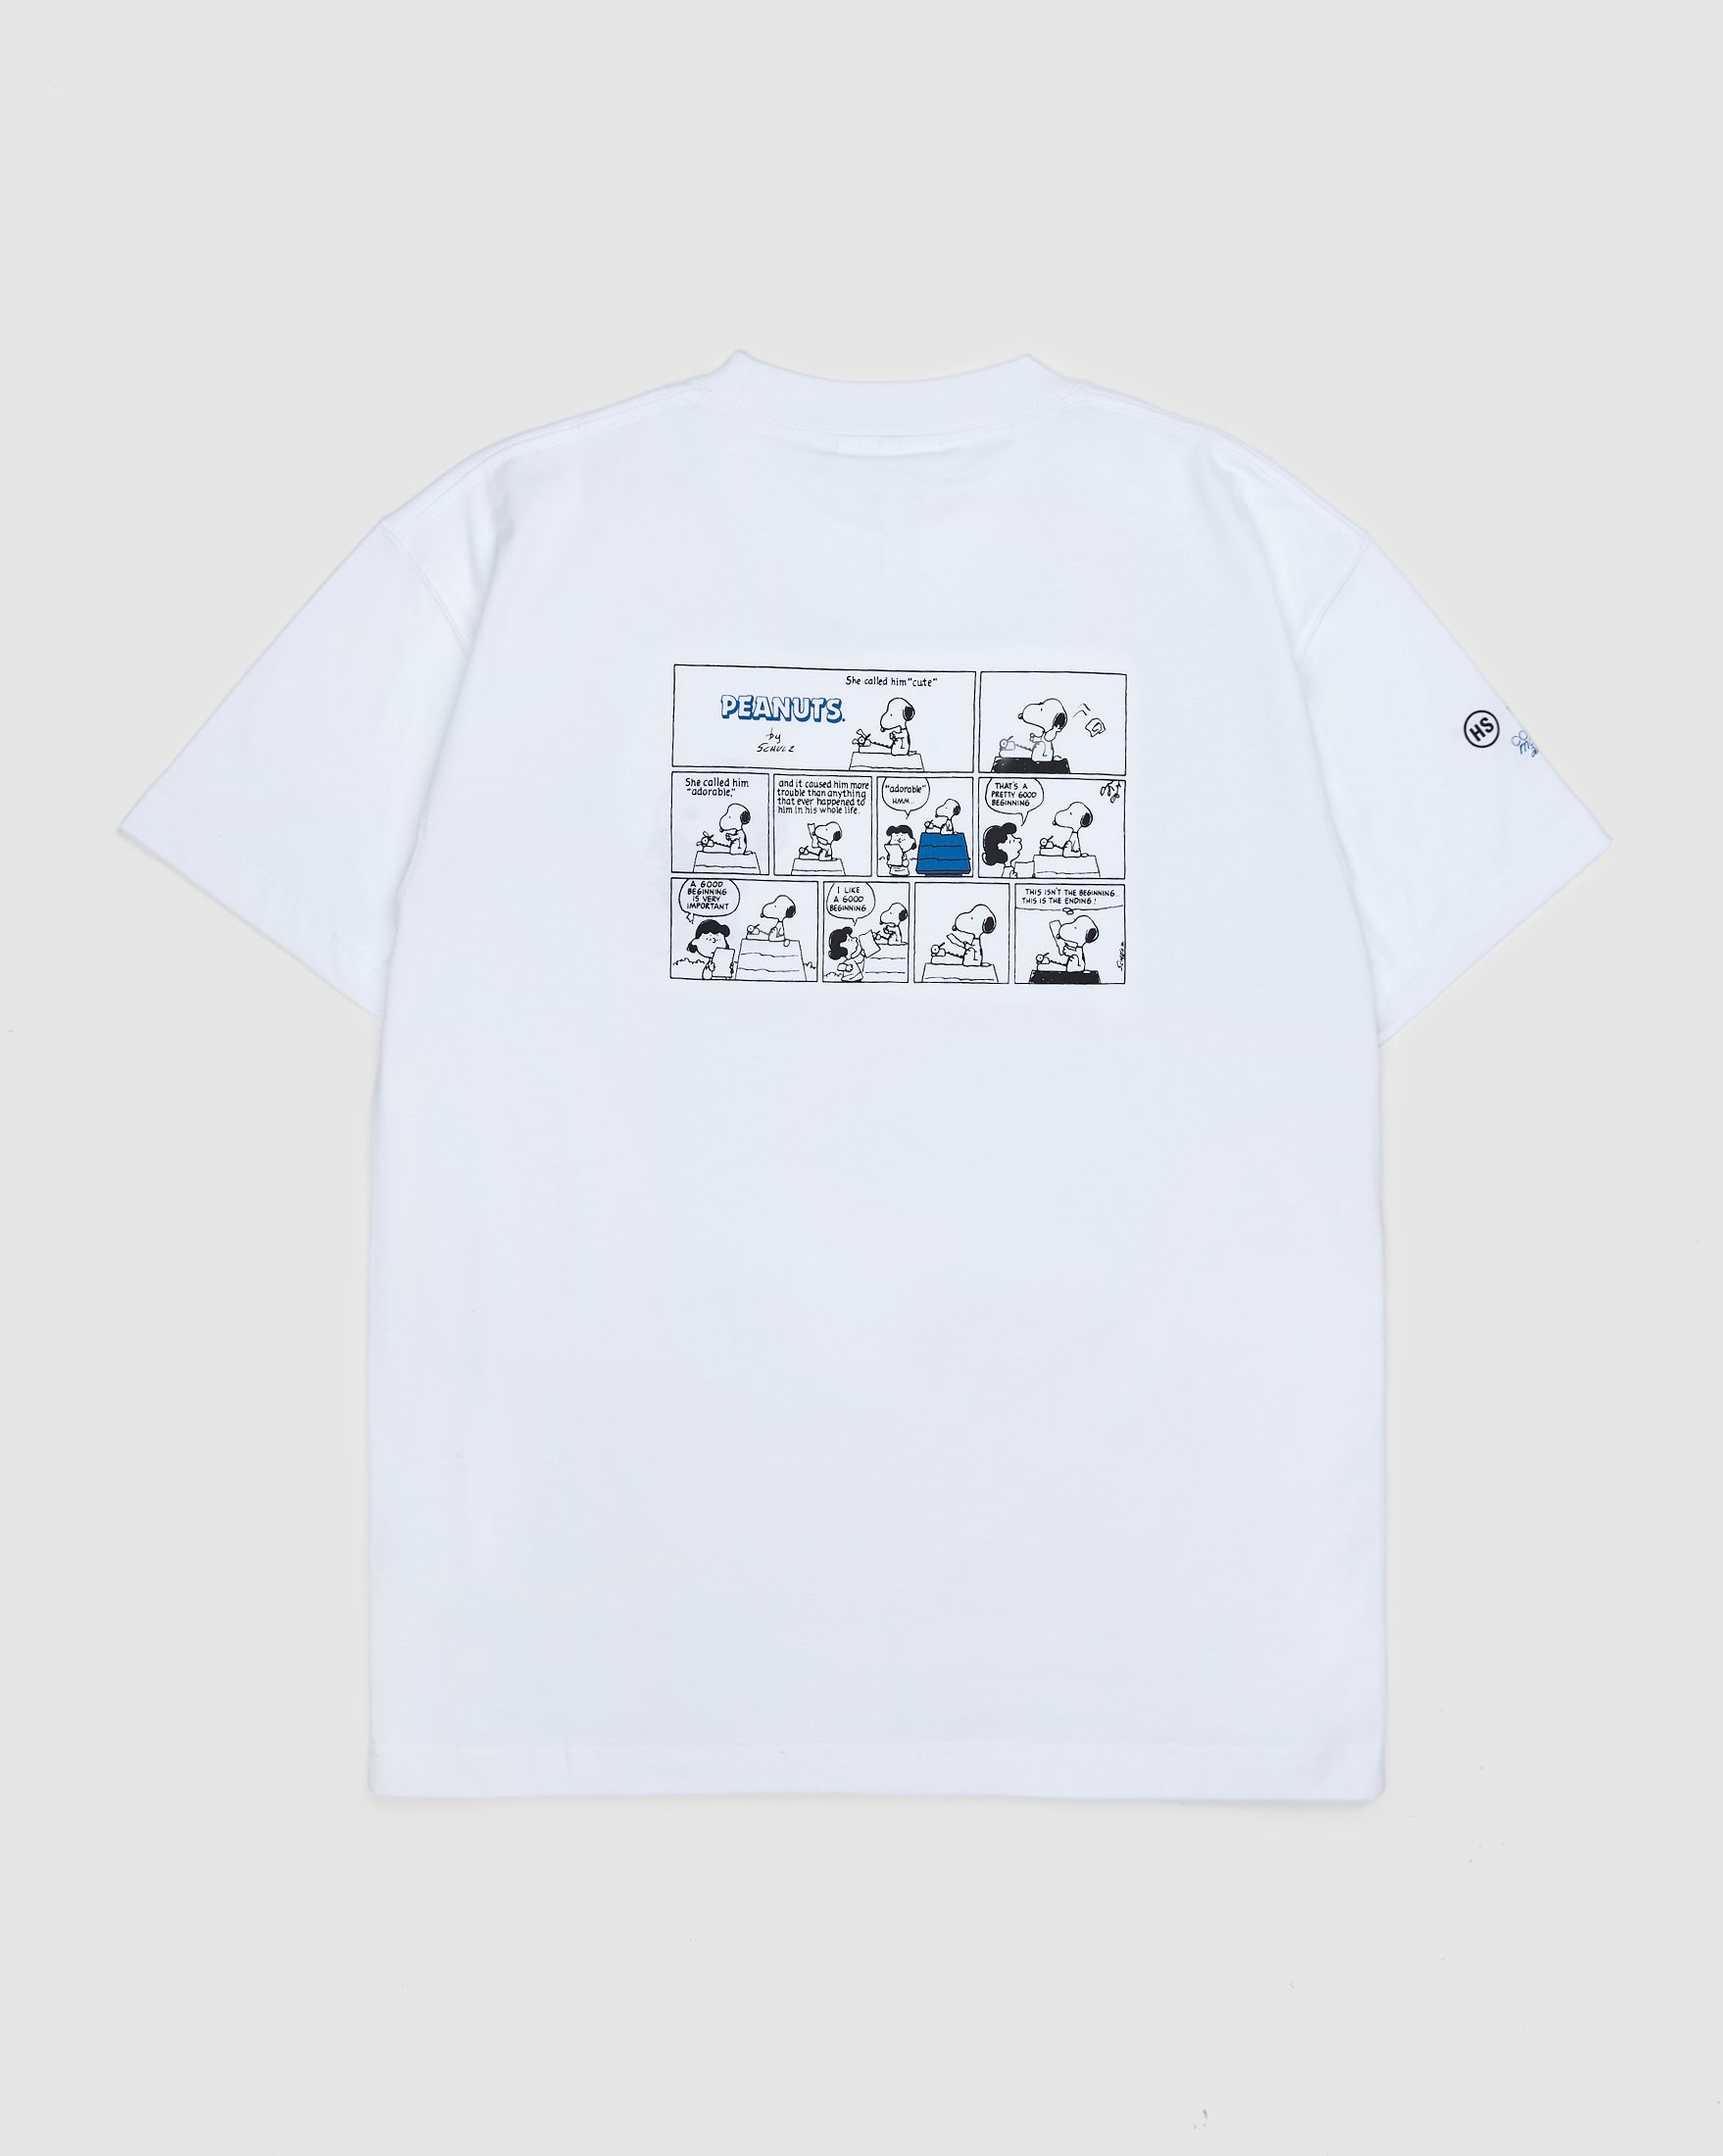 Colette Mon Amour x Soulland - Snoopy Comics White T-Shirt - Clothing - White - Image 2